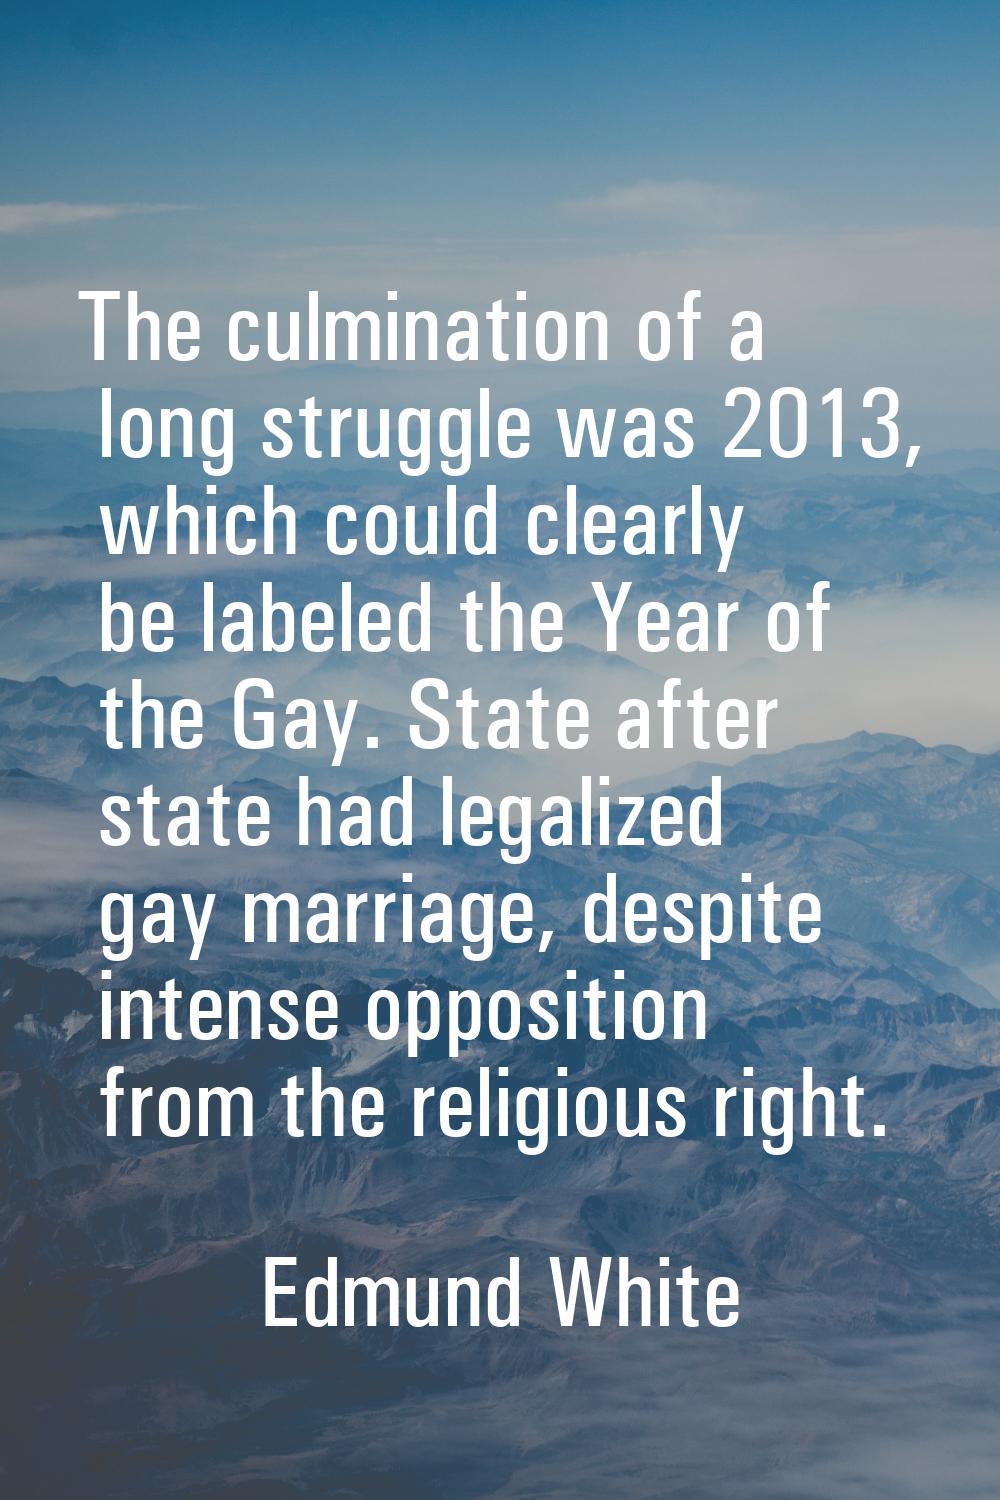 The culmination of a long struggle was 2013, which could clearly be labeled the Year of the Gay. St